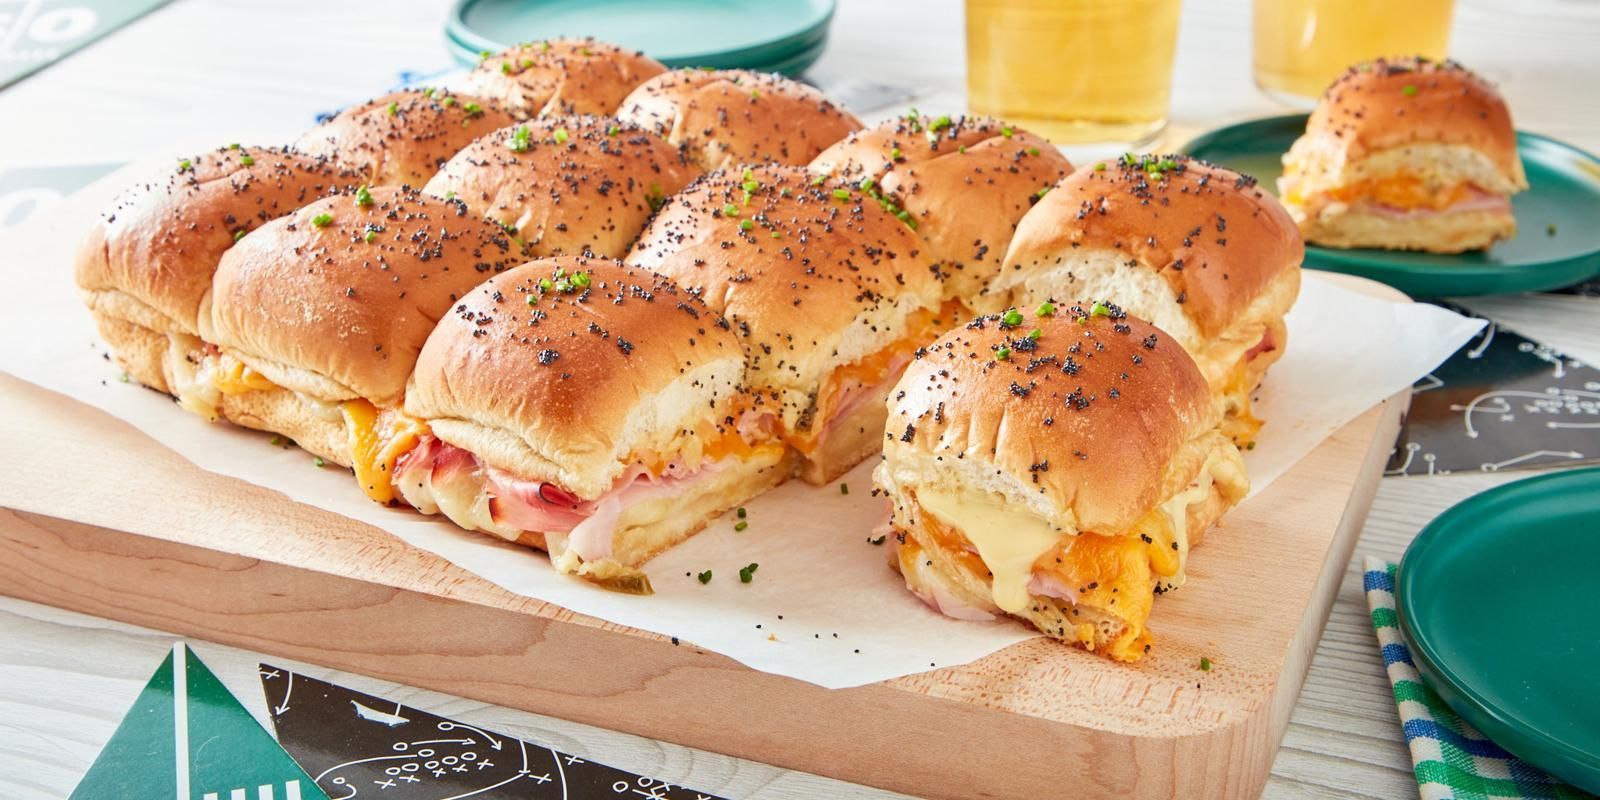 https://hips.hearstapps.com/hmg-prod/images/after-school-snacks-ham-and-cheese-sliders-64aec655ed0aa.jpeg